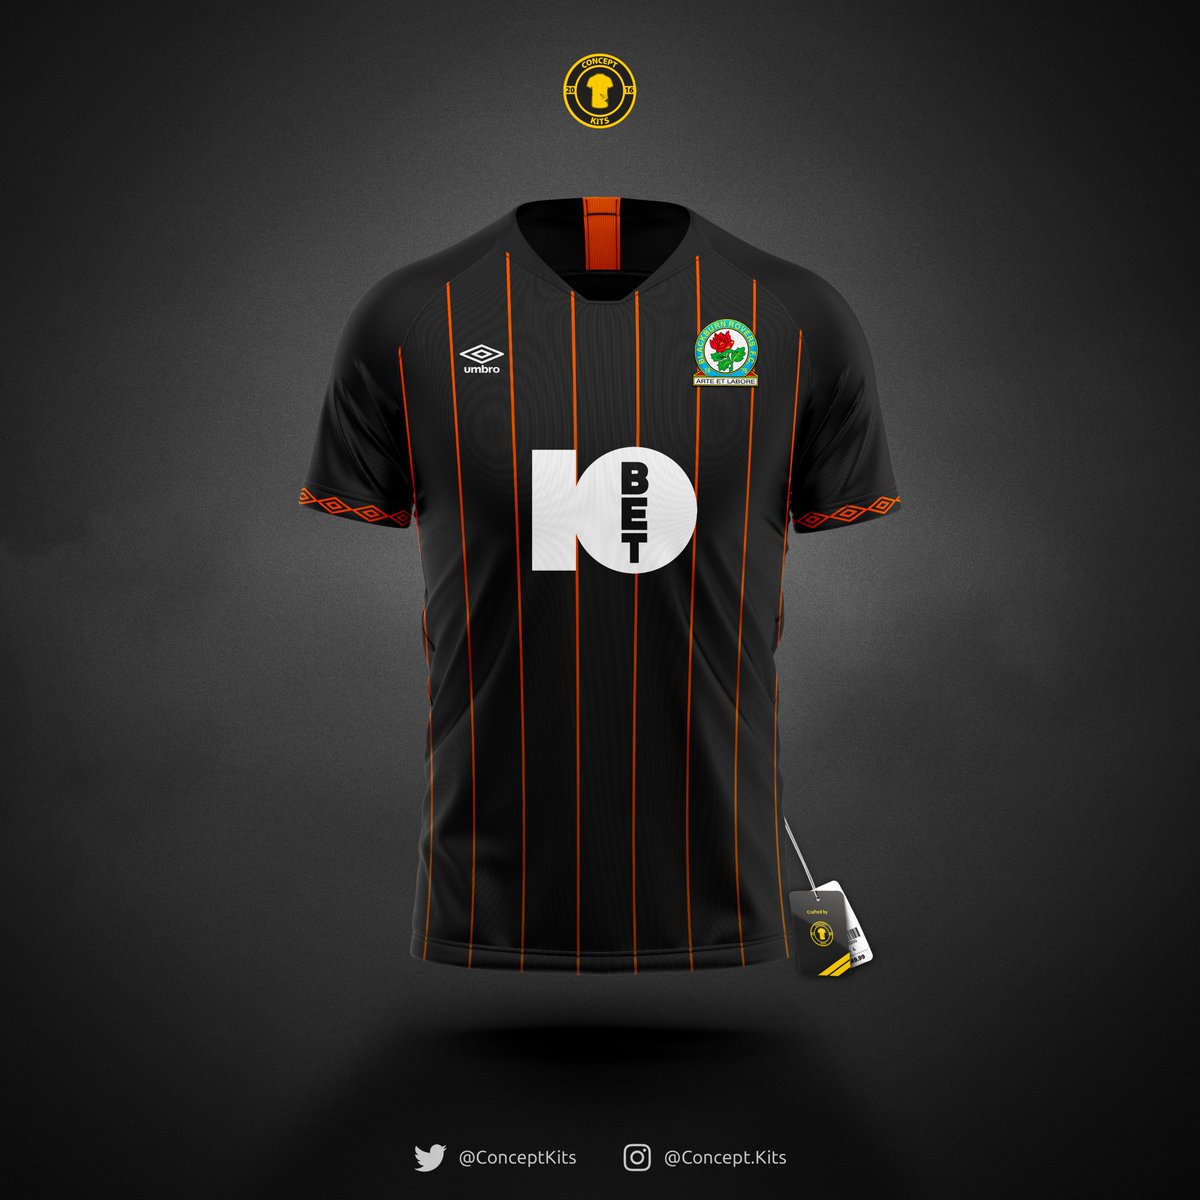 Concept Kits On Twitter Blackburn Rovers Football Club Home Away And Third Kit Concepts For The 2020 21 Season Brfc Blackburn Blackburnfc Rovers Blackburnrovers Blackburnroversfc Umbro Ewoodpark Efl Kitconcept Https T Co Plxs19qwcu